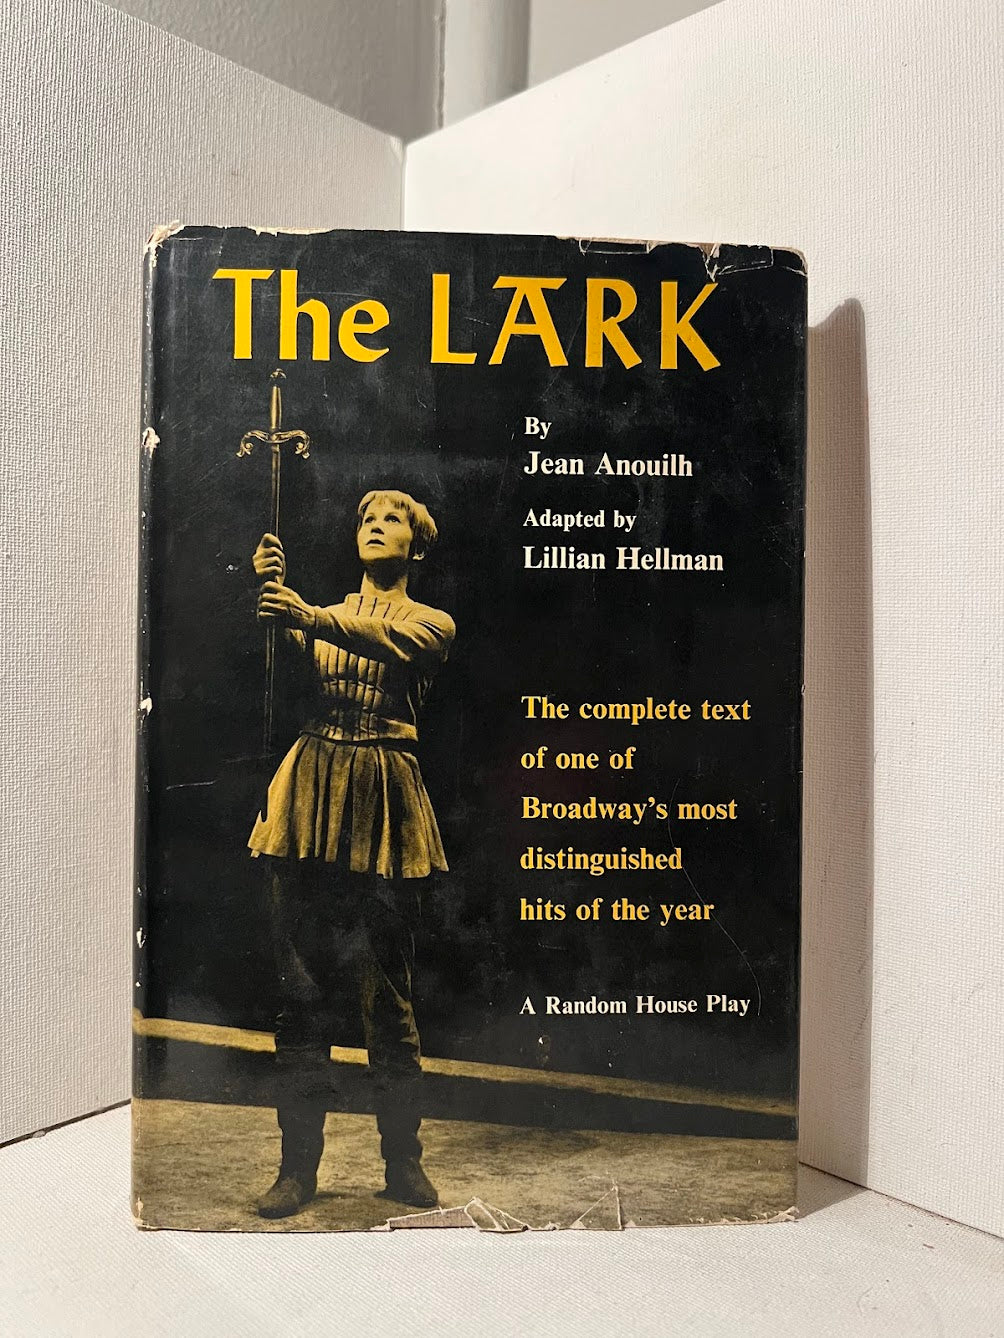 The Lark by Jean Anouilh